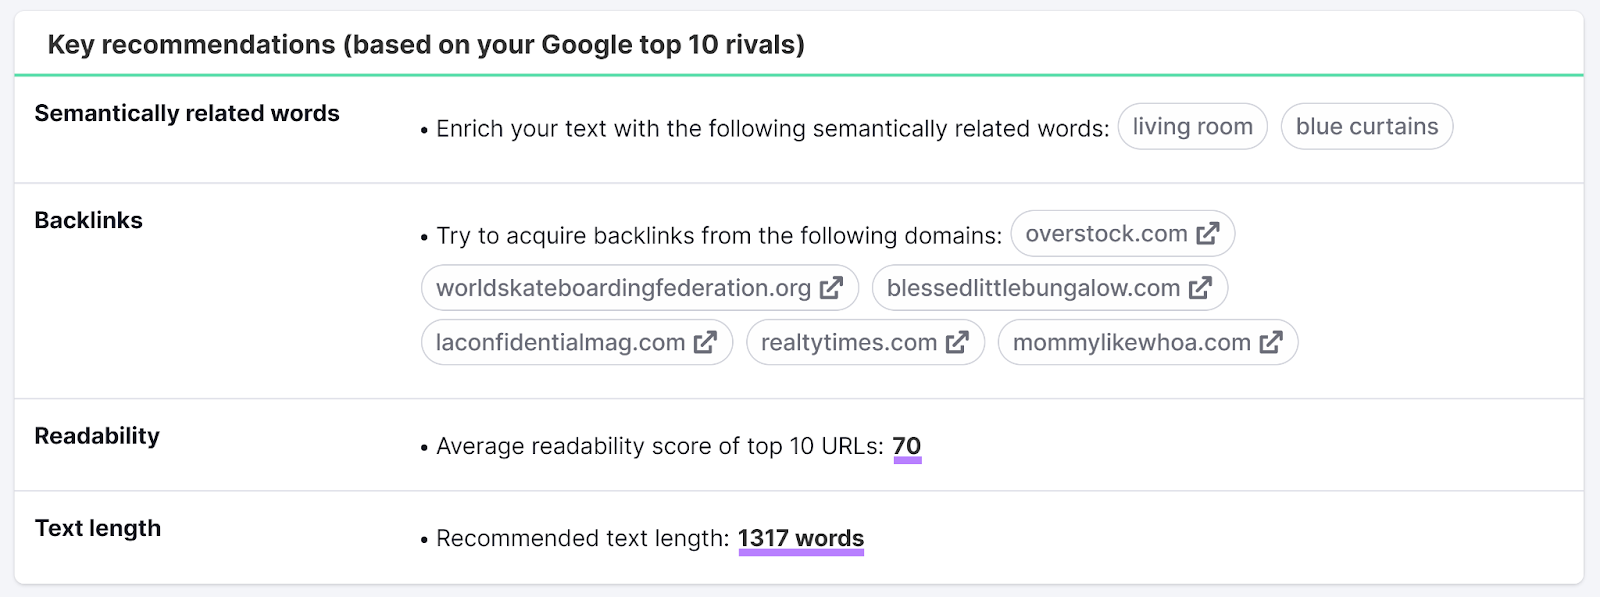 Key recommendations section of SEO Content Template results with readability and text length scores highlighted.